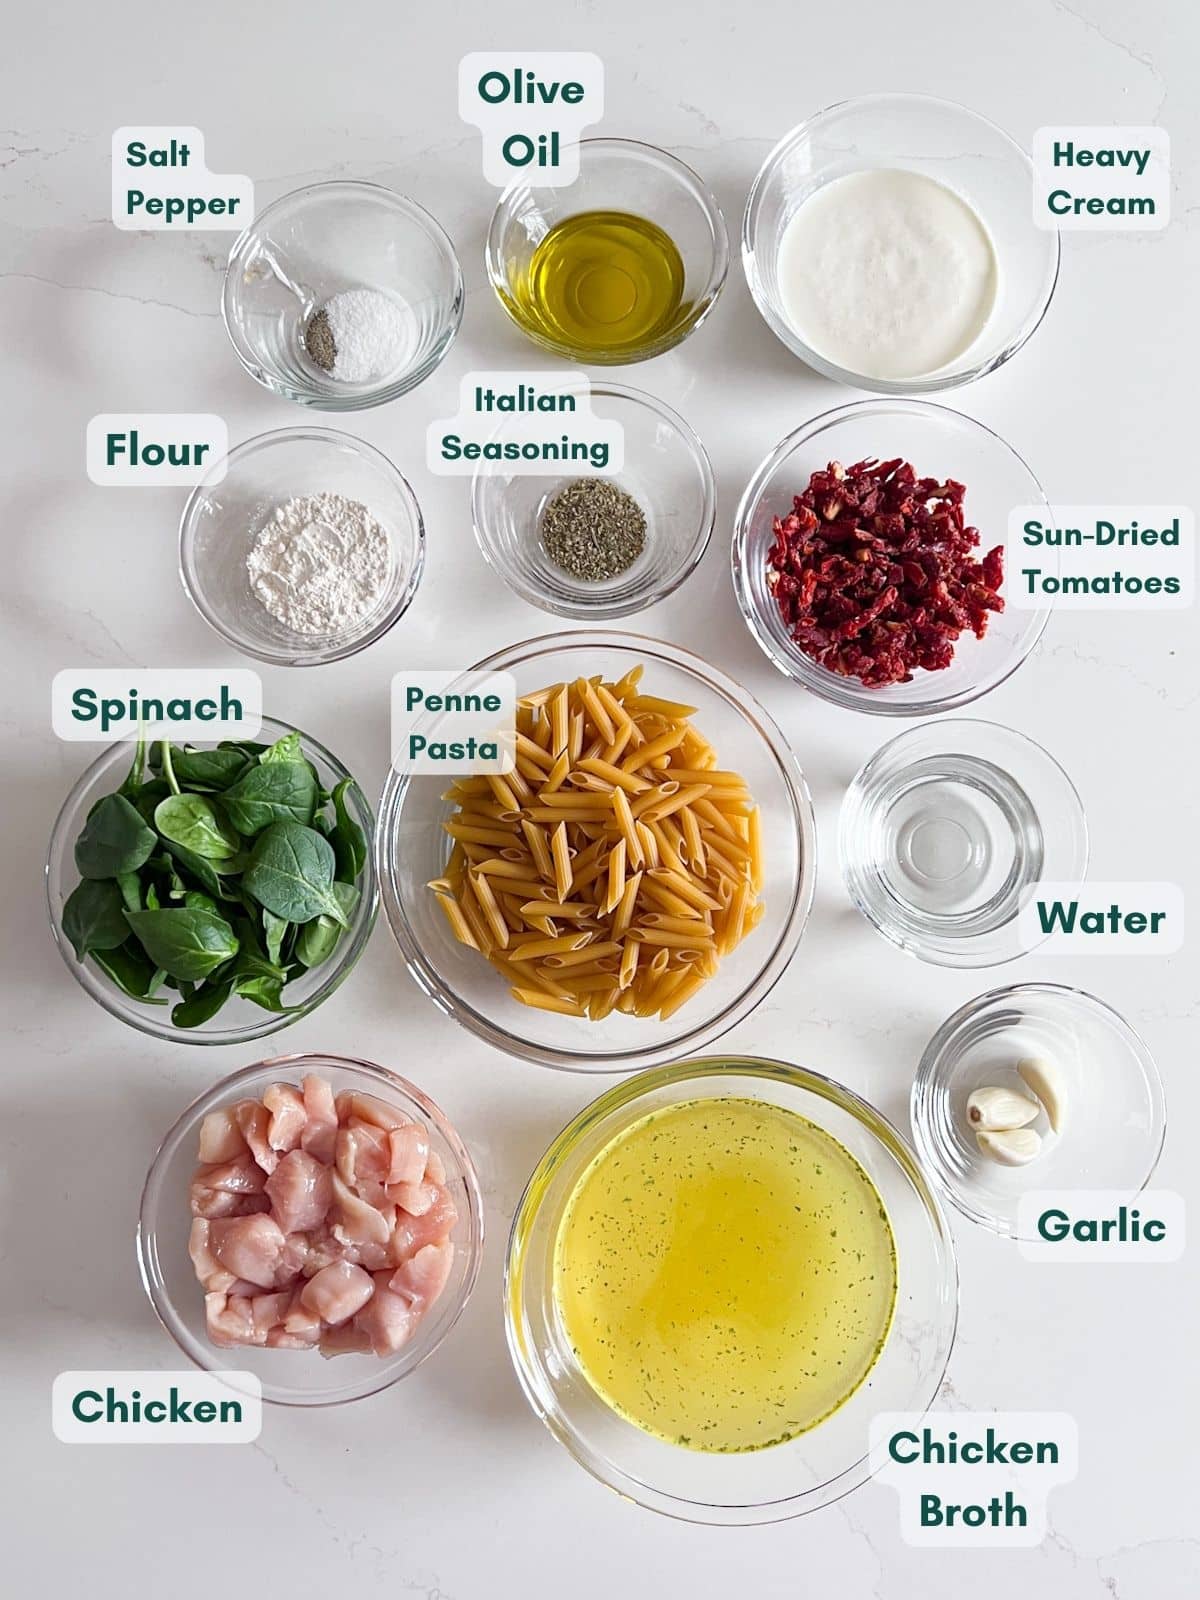 An overhead image of the labeled ingredients in glass bowls.